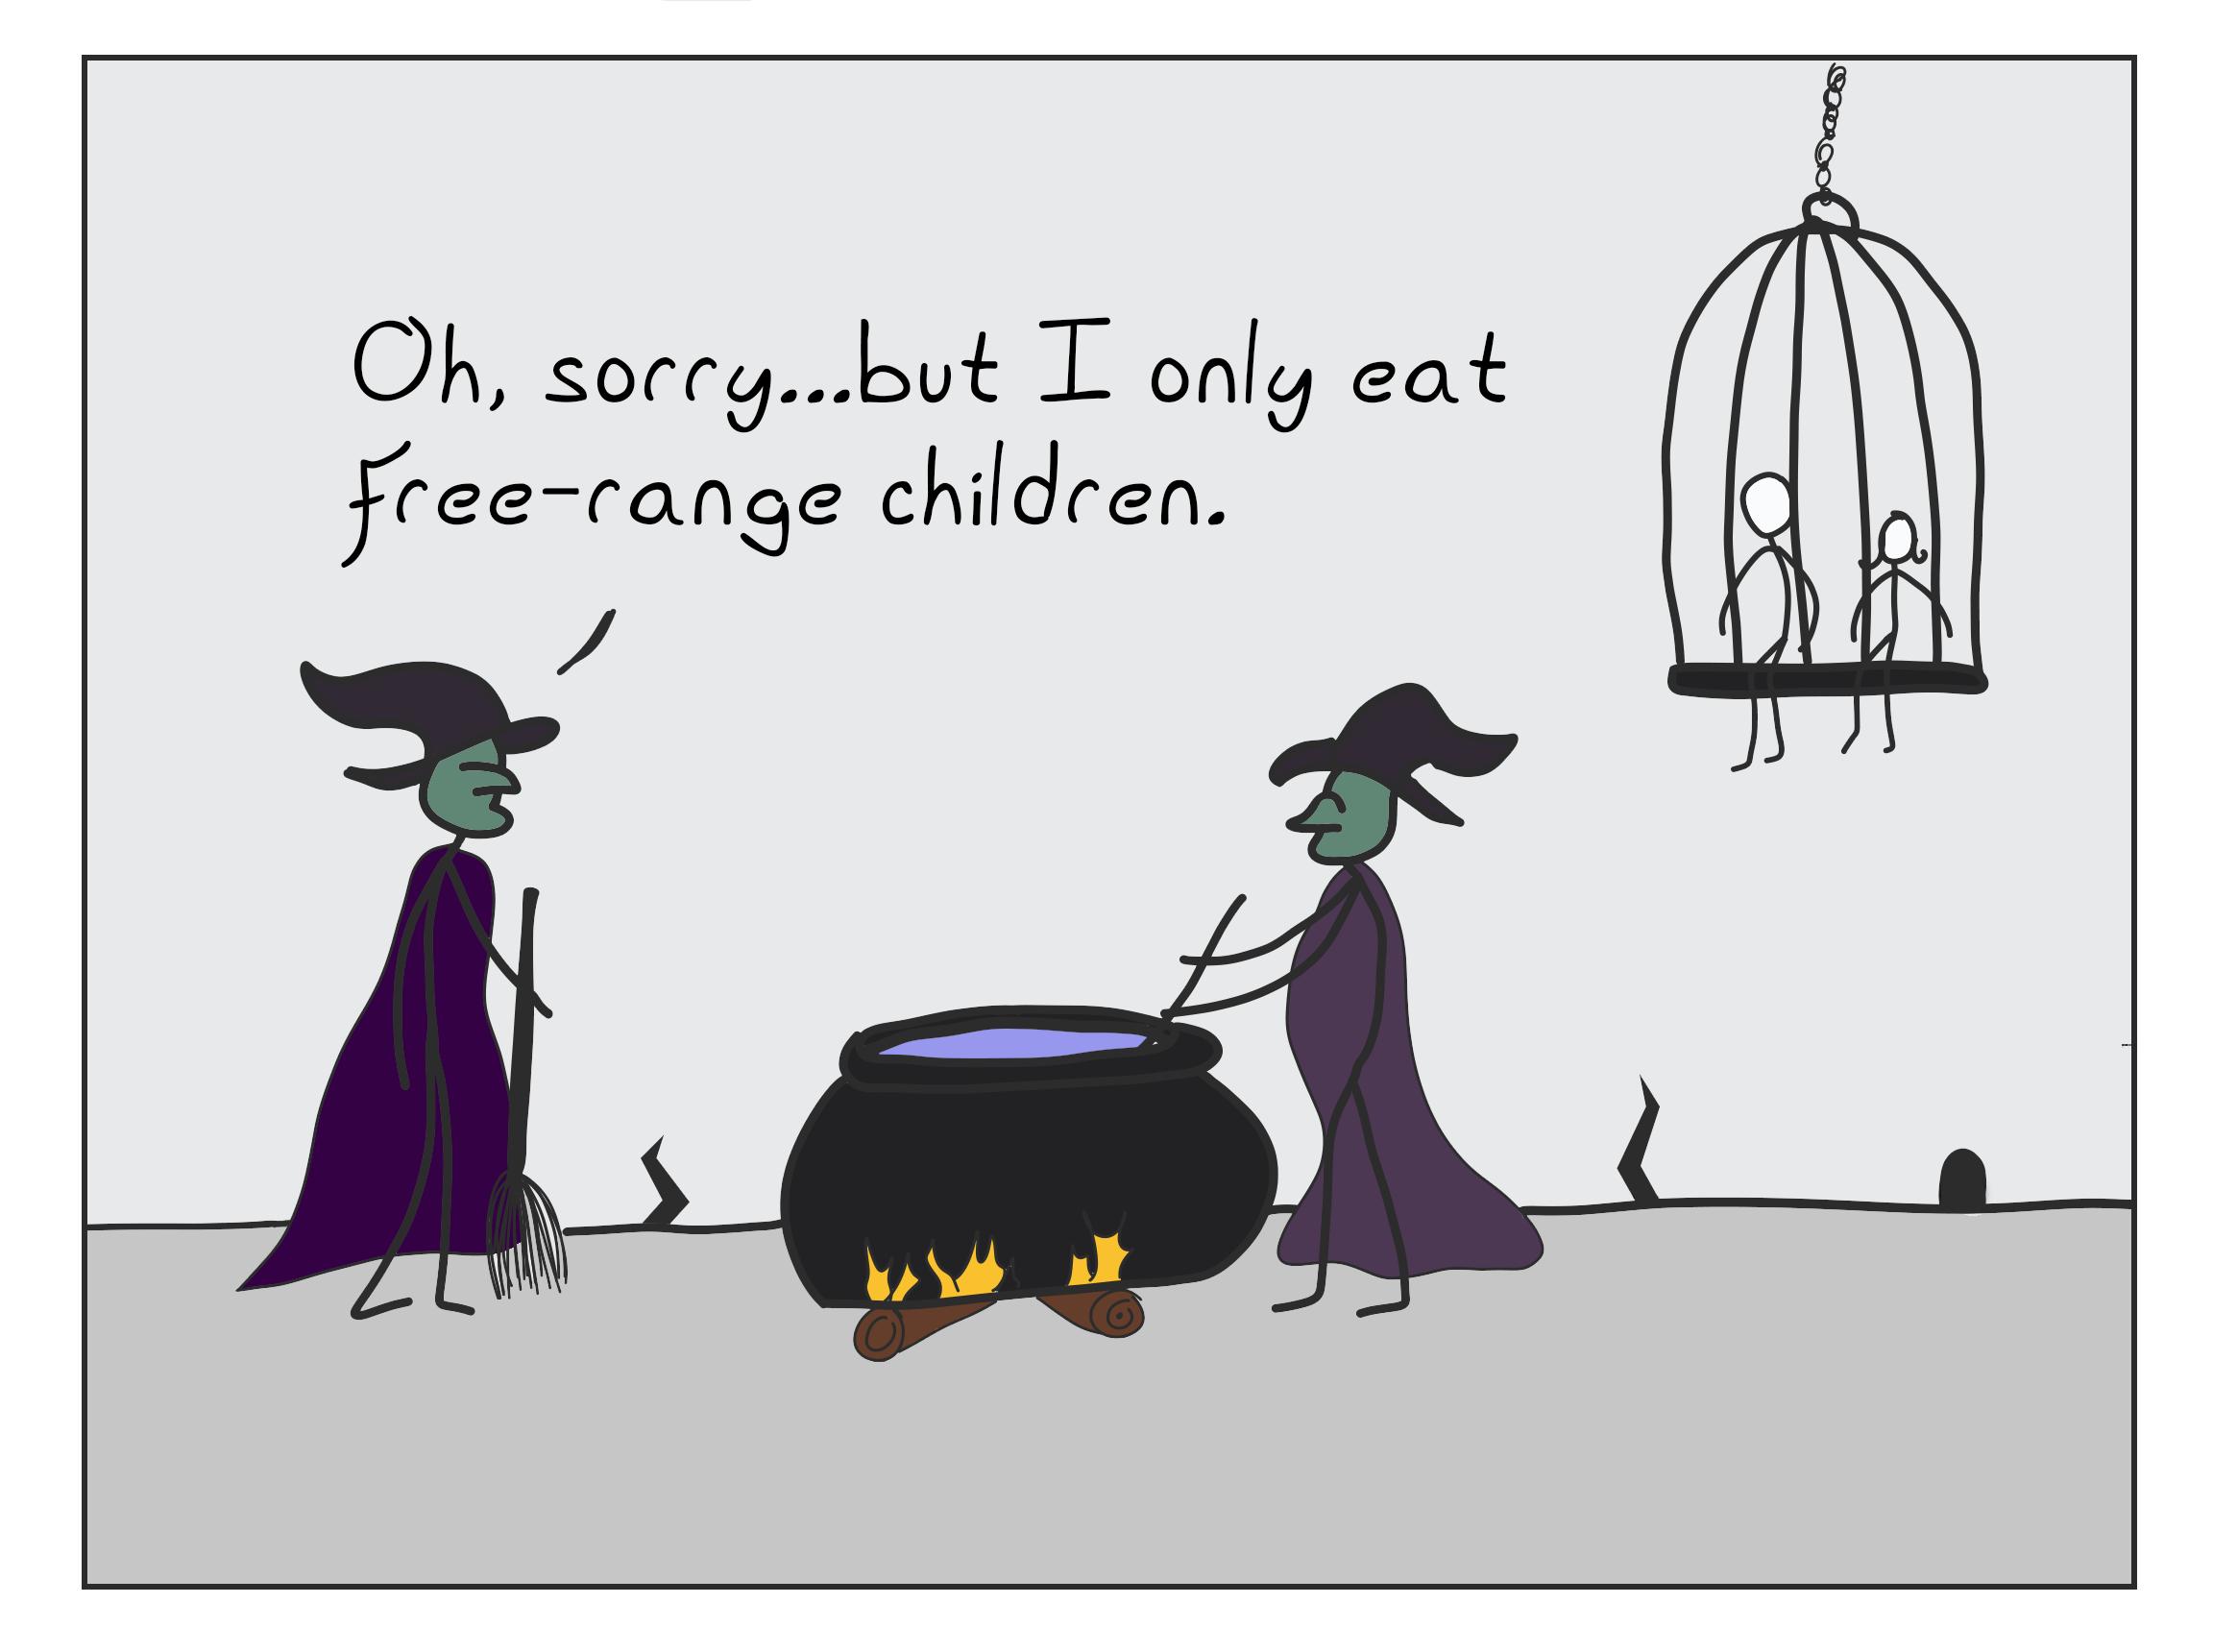 Two witches standing around a cauldron. There is a cage in the background containing two children. One witch says to the other, "Oh sorry, but I only eat free-range children."